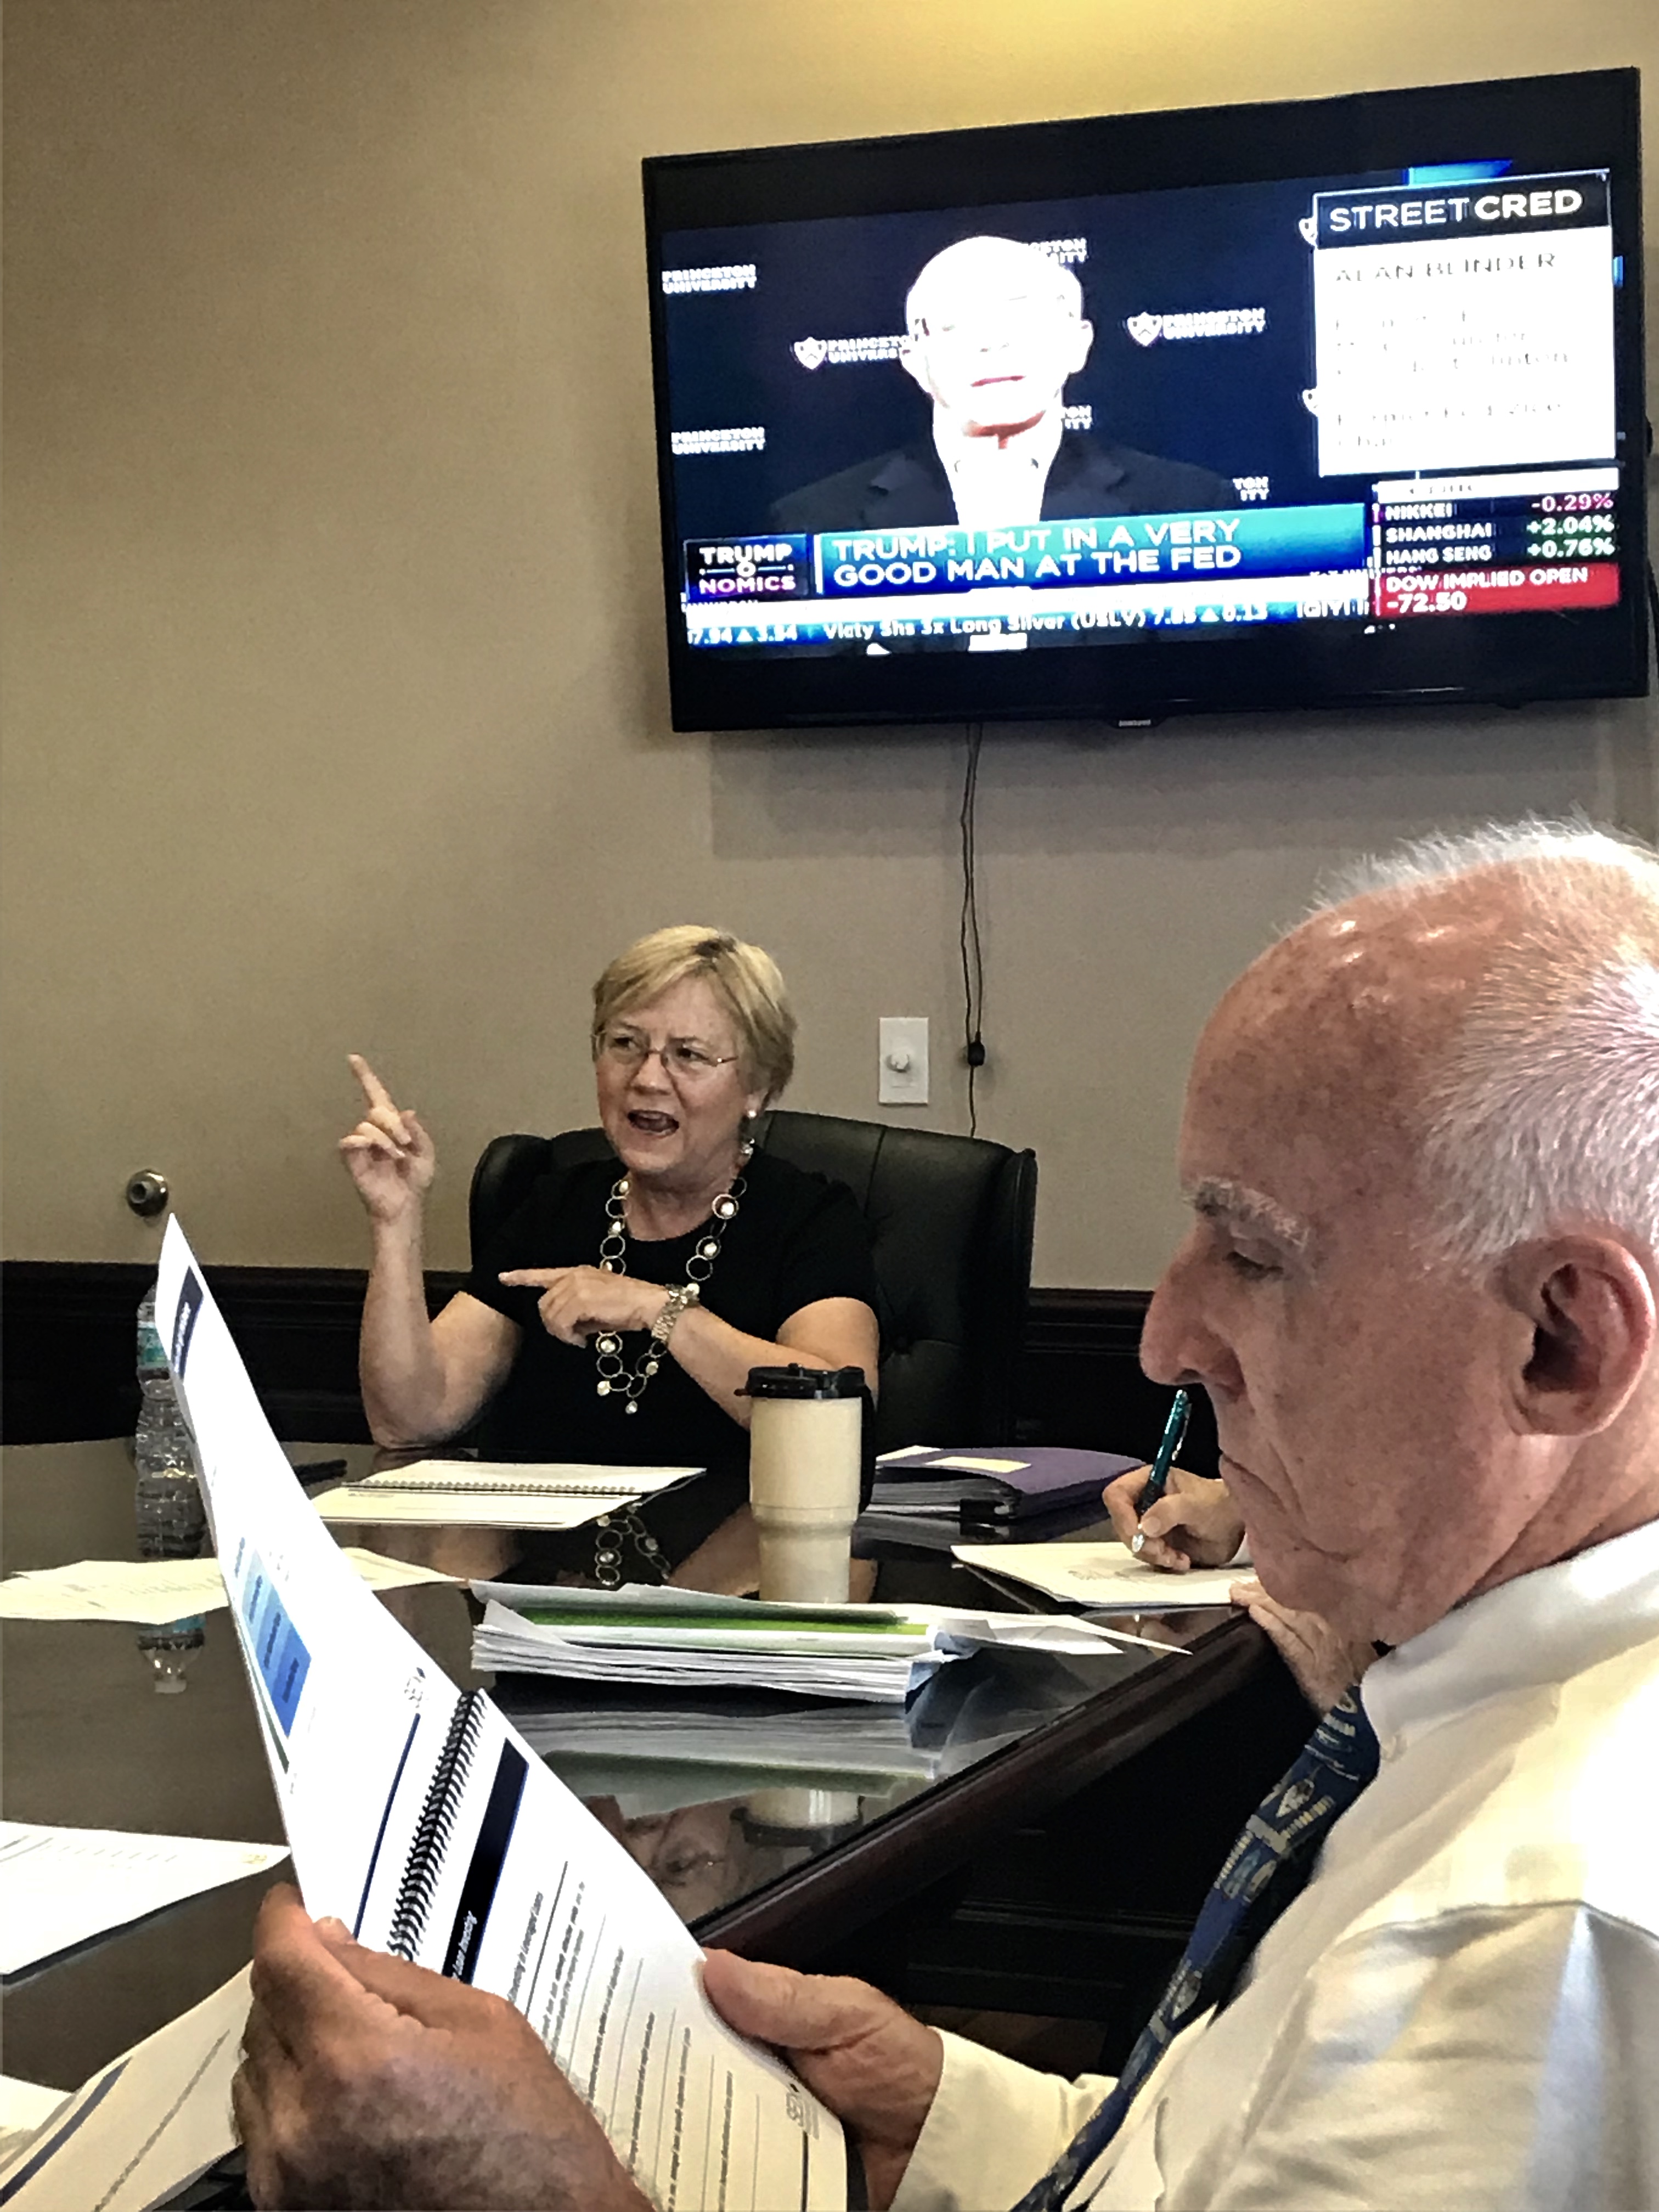 Ms. Ellen Welsh, CFA Managing Director & Senior Investment Manager of Seix Investment Advisors, LLC. was invited to present an educational presentation to the Board of Trustees. Leveraged Loan Strategy was the topic of discussion.